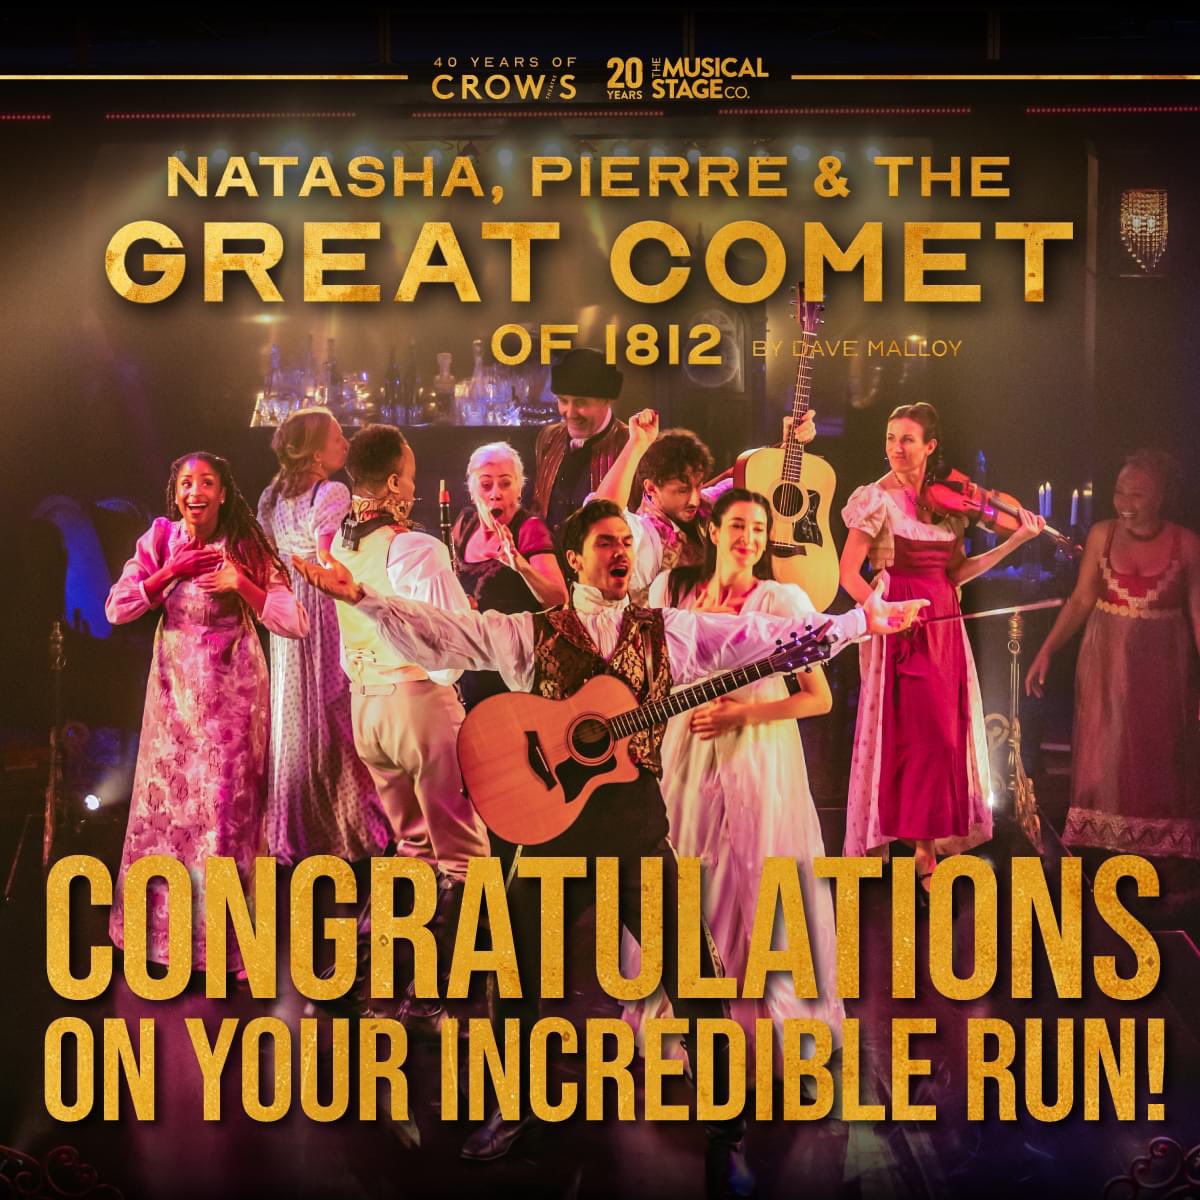 Had to go back one last time to catch the final performance of @CrowsTheatre and @MusicalStageCo brilliant and beautiful production of NATASHA, PIERRE & THE GREAT COMET OF 1812 at Streetcar Crowsnest. See you next summer at the Royal Alexandra Theatre!